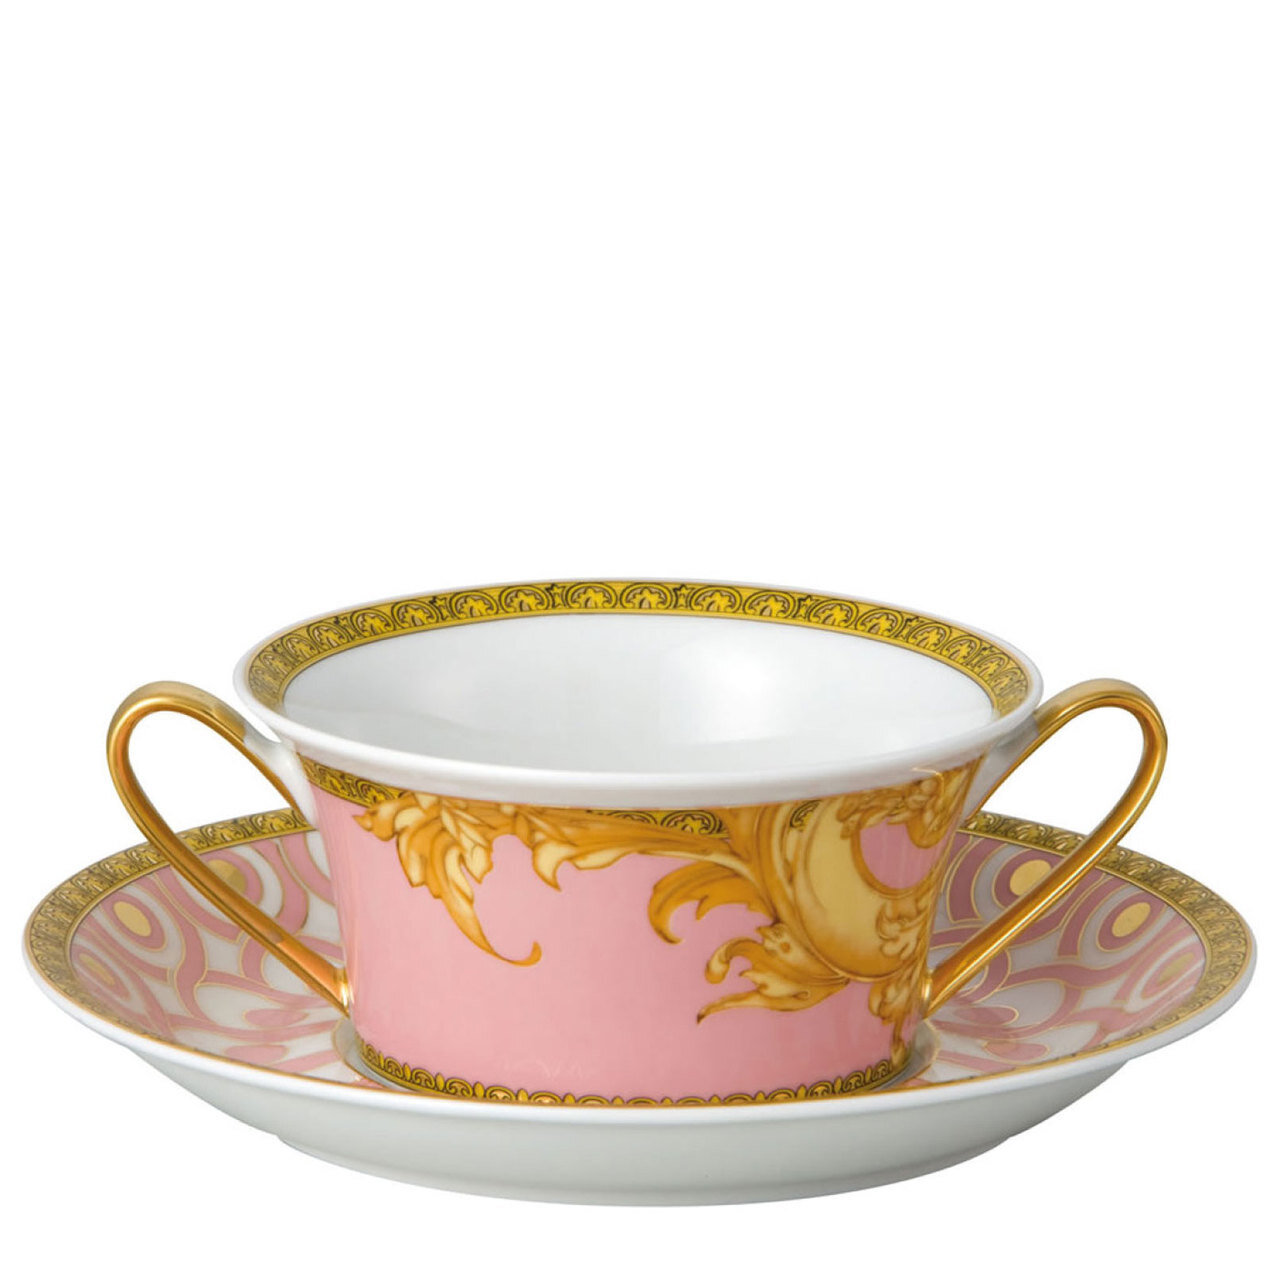 Versace Byzantine Dreams Cream Soup Cup and Saucer 10 oz.